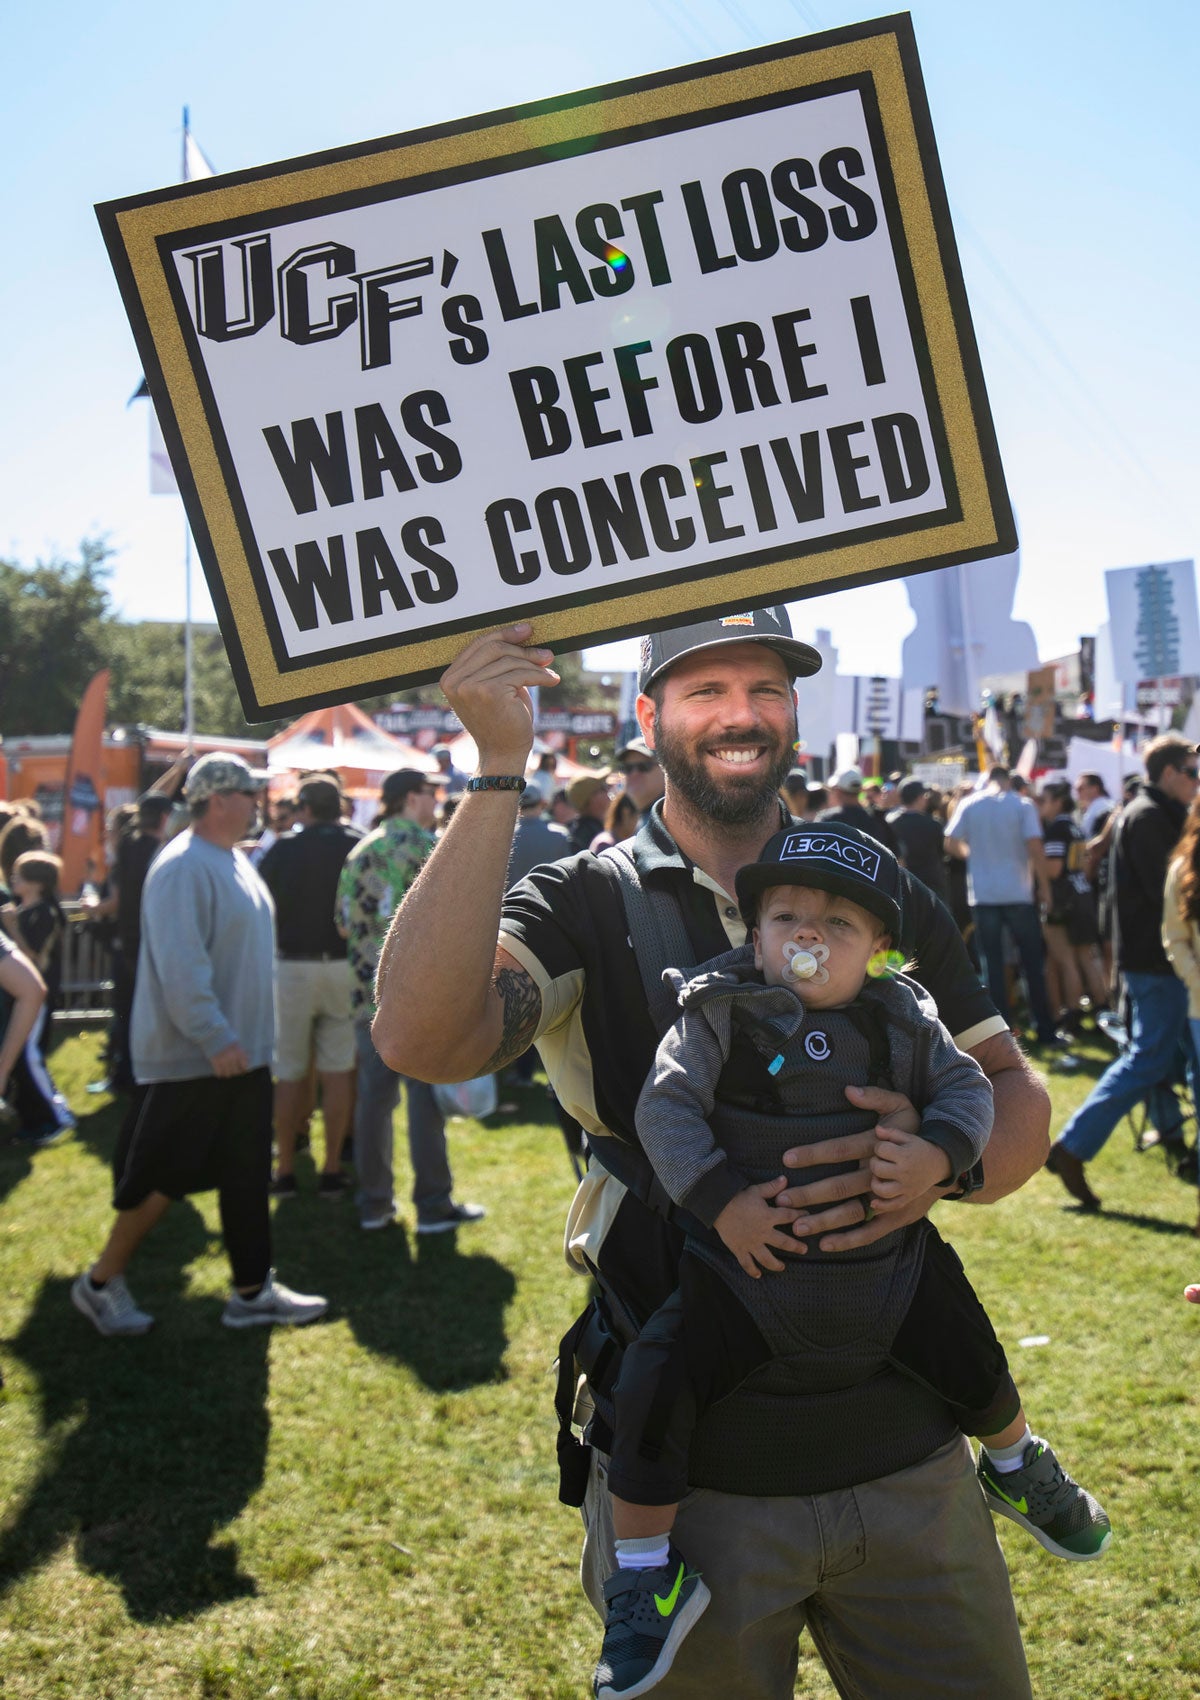 Man holding a baby with a sign that read "UCF's last loss was before I was conceived"